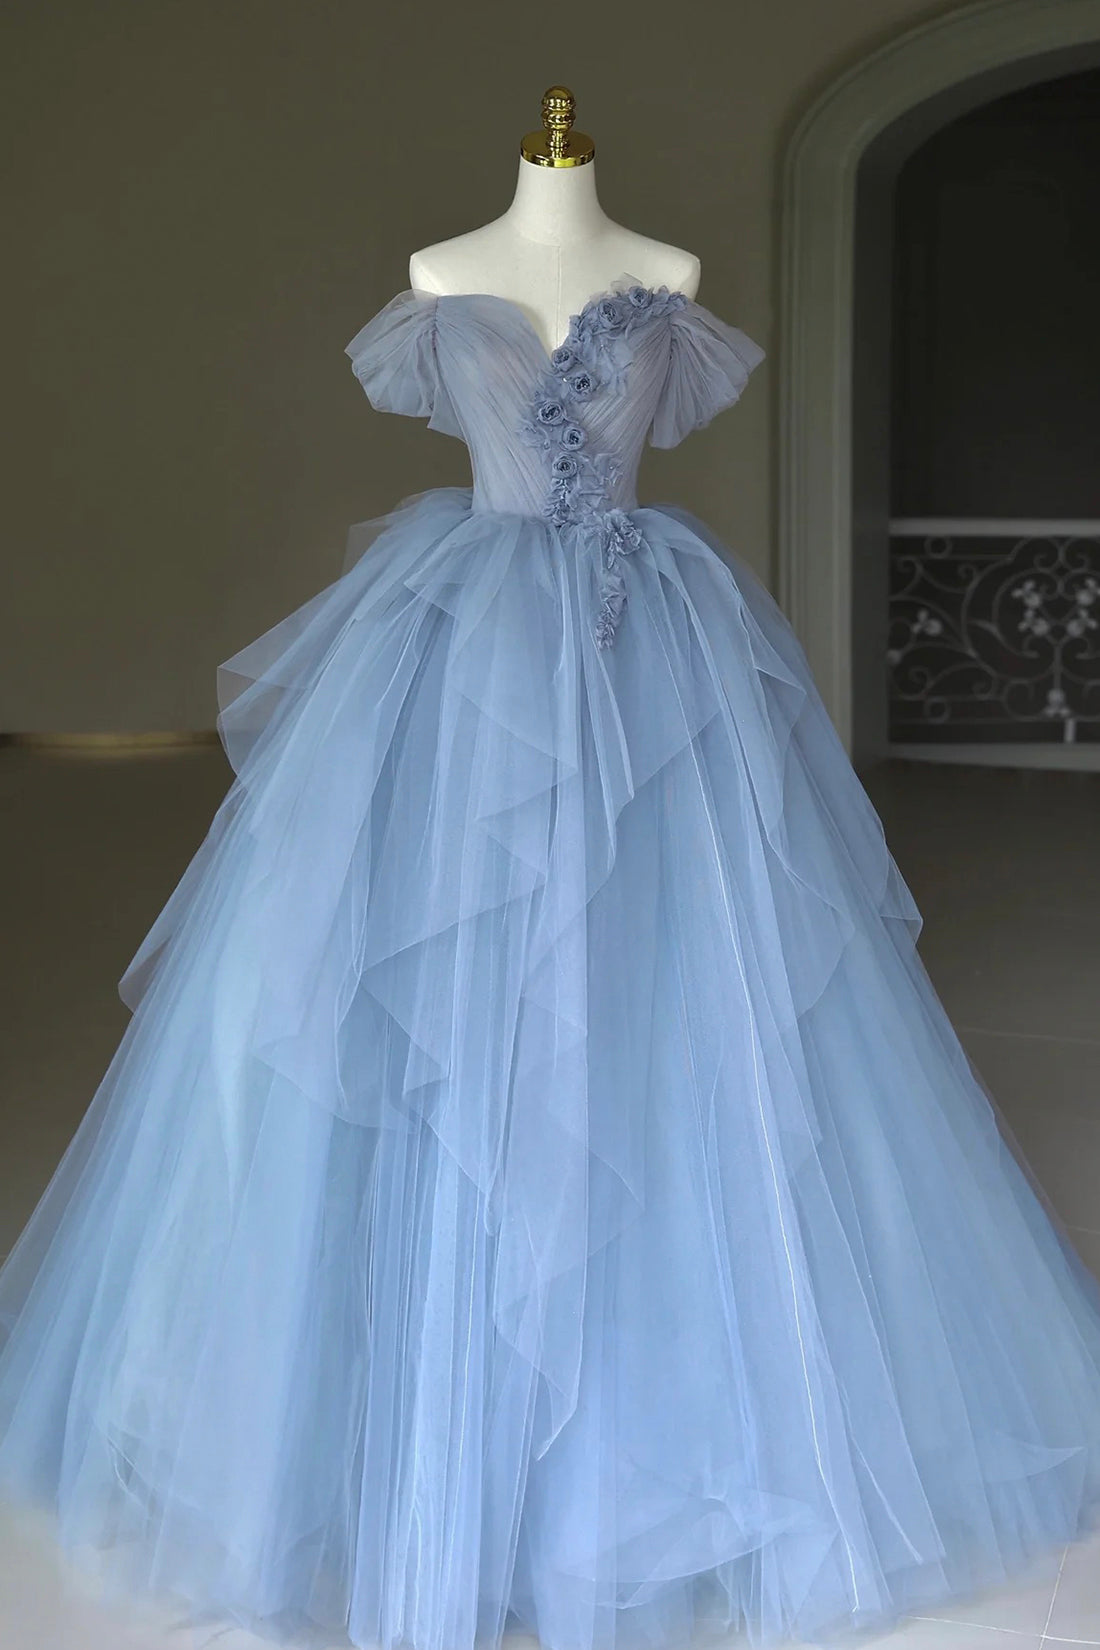 Prom Dress Floral, Blue Tulle Floor Length Prom Dress, Off the Shoulder Evening Dress with 3D Flowers